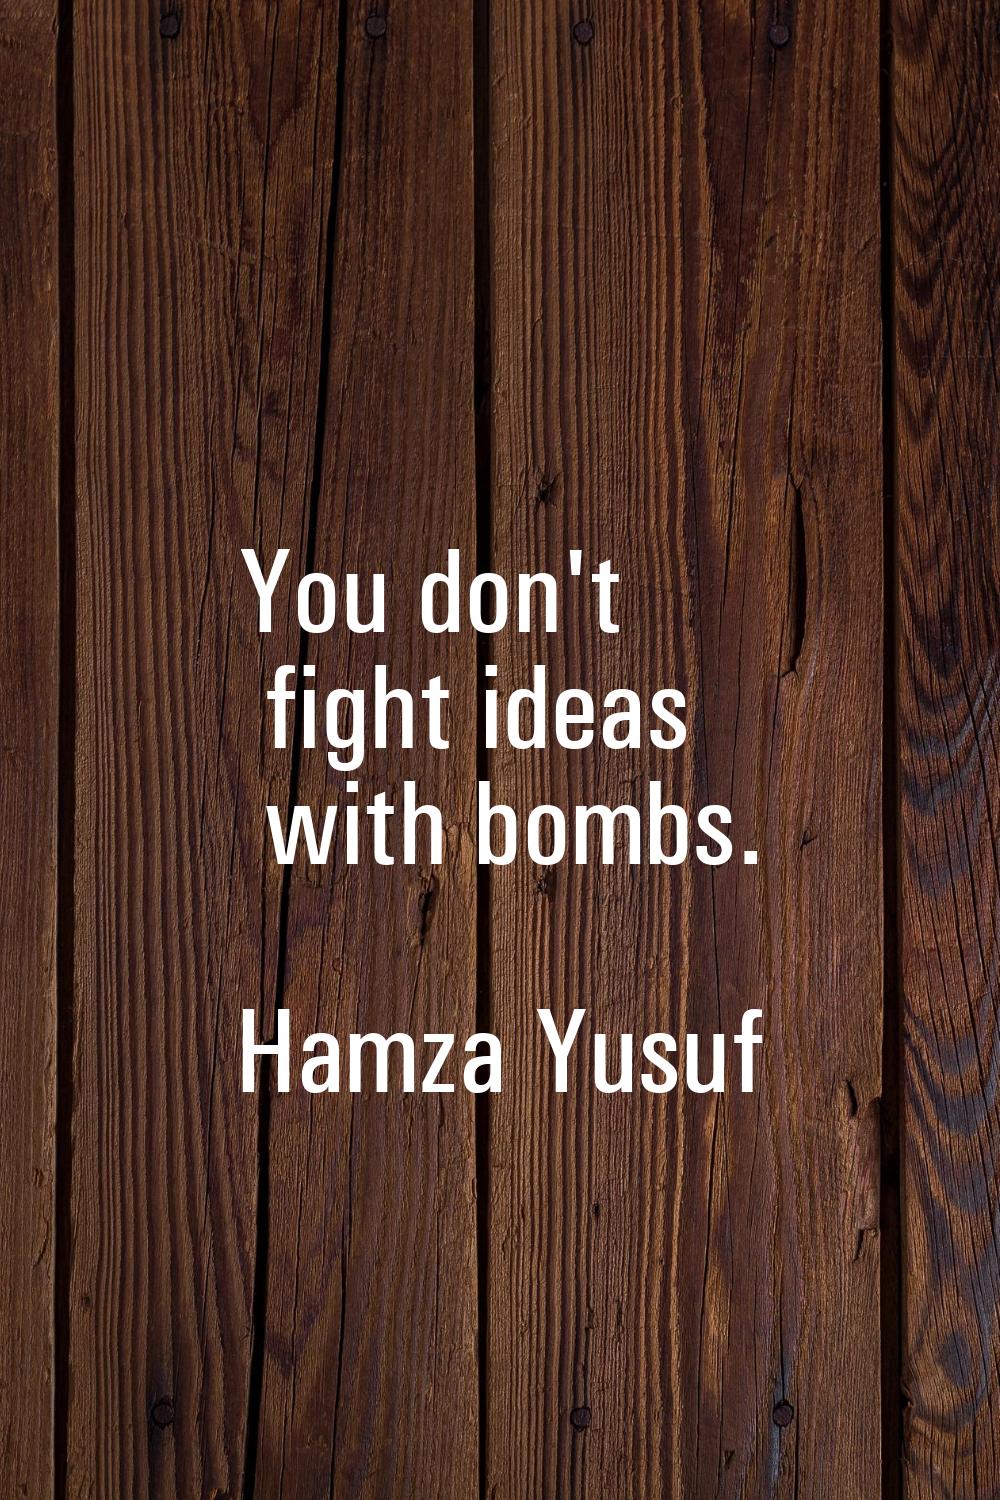 You don't fight ideas with bombs.